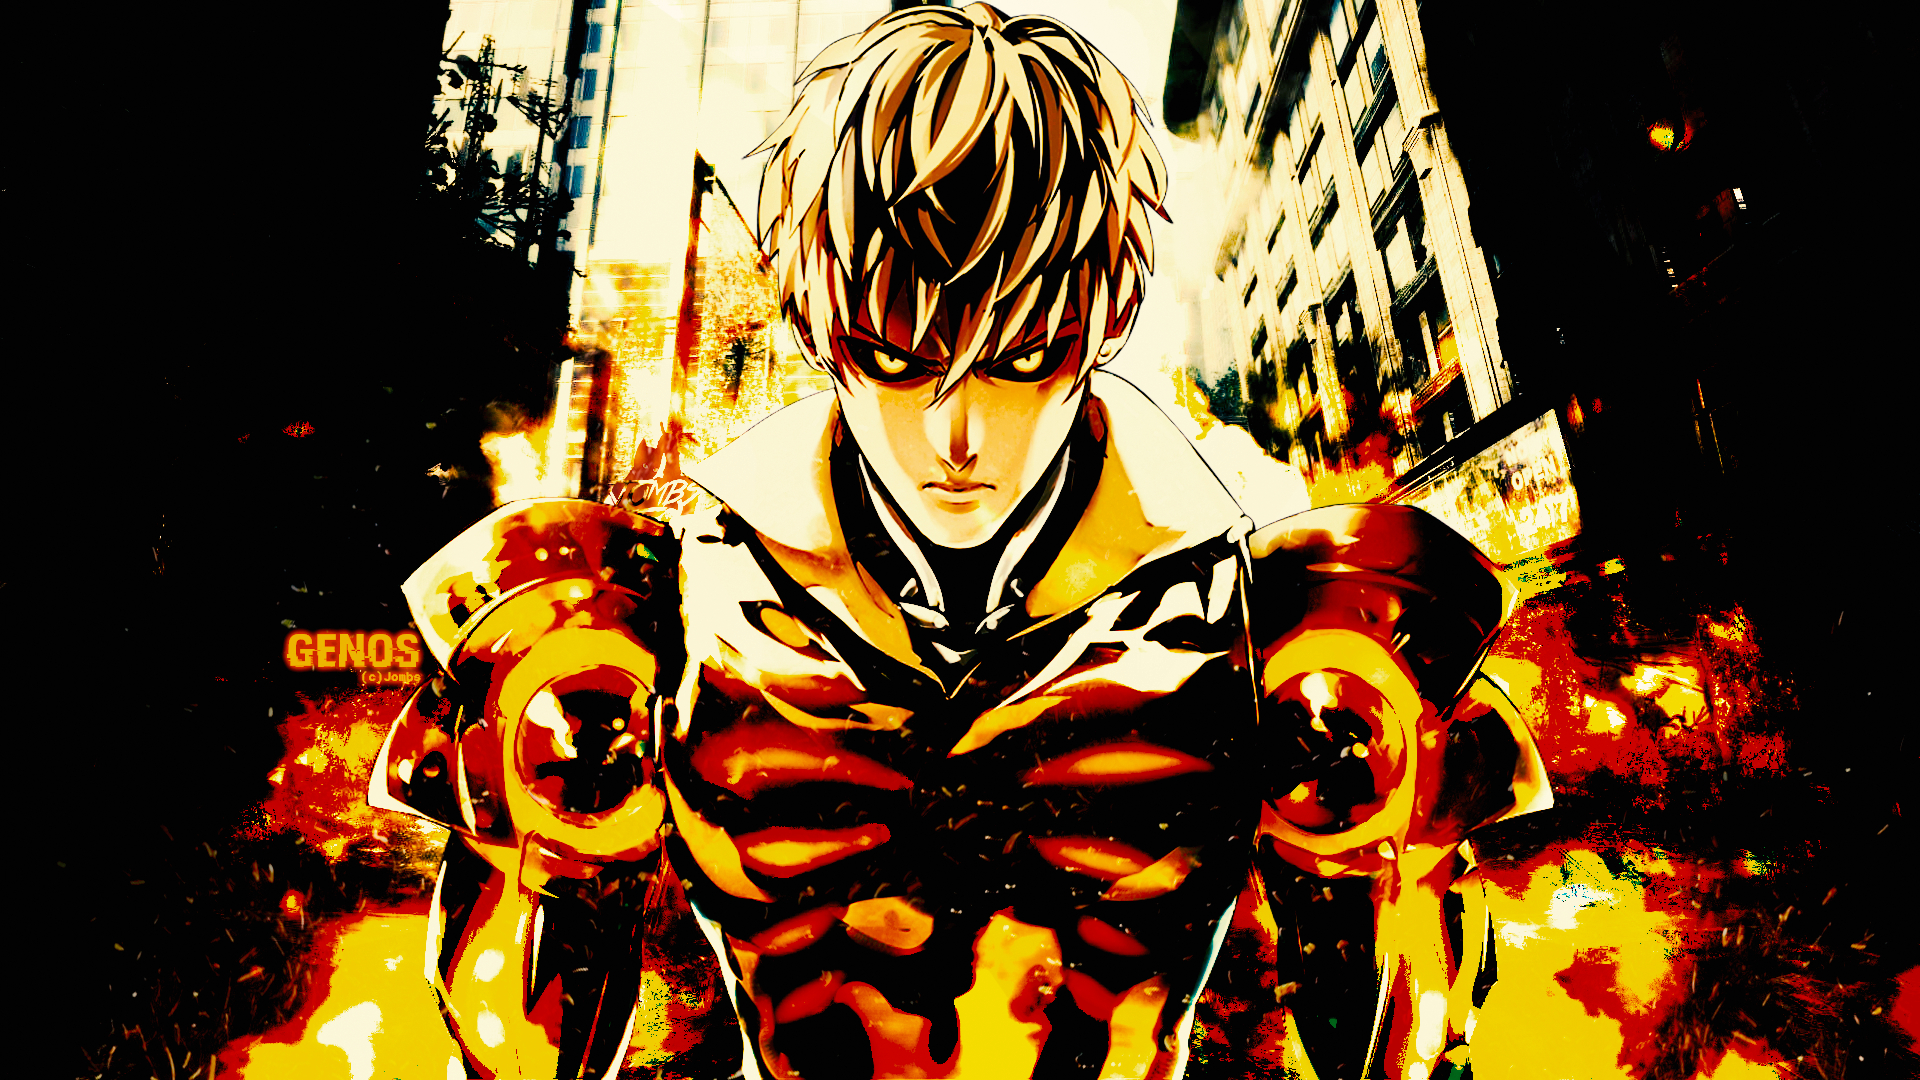 1920x1080 Anime One-Punch Man Genos (One-Punch Man) Wallpaper | Anime, One punch man, One punch man poster